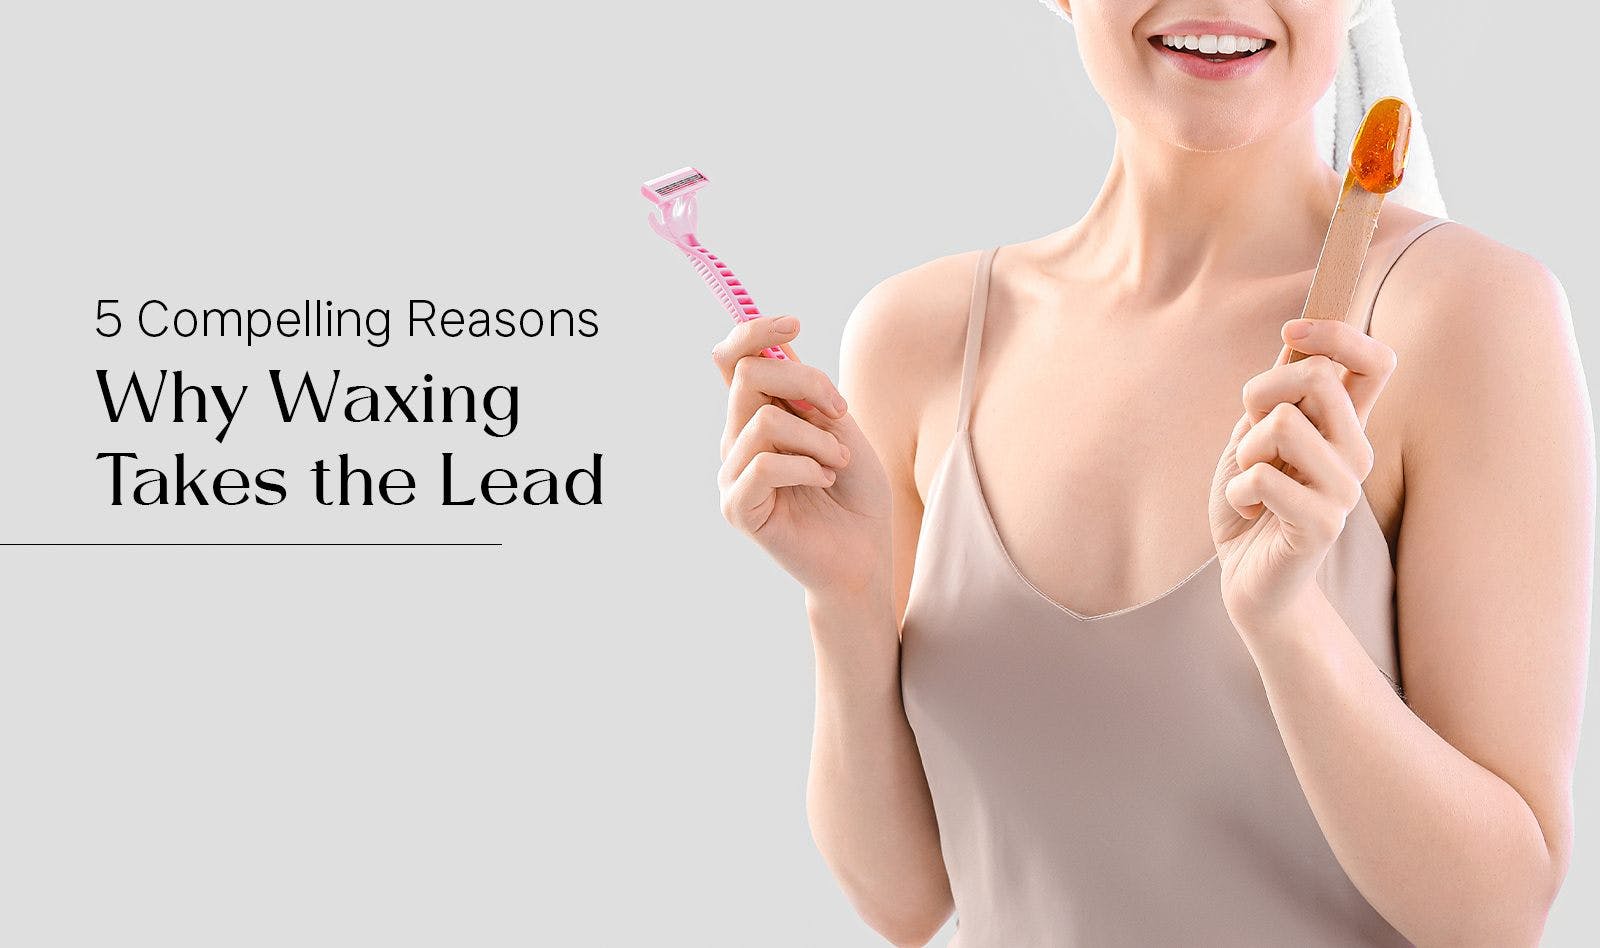 waxing-vs-shaving-compelling-reasons-why-waxing-takes-lead